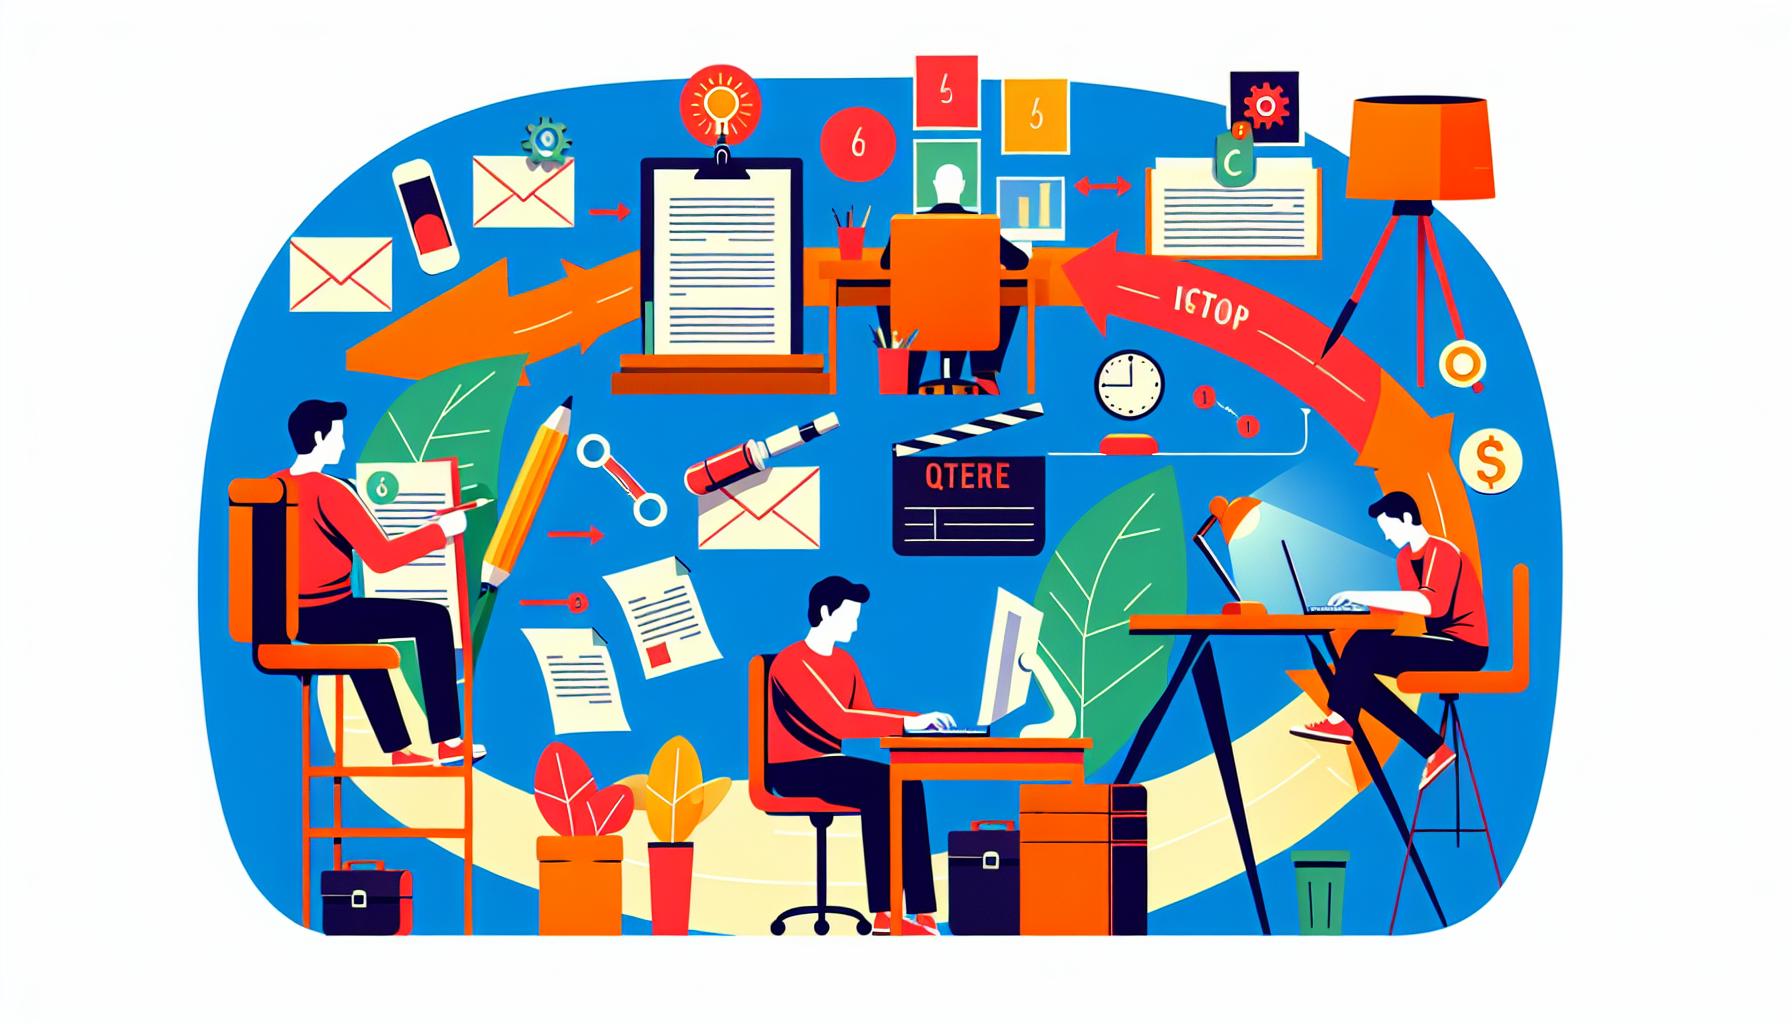 Illustration representing the process of acquiring a screenwriting agent in a step-by-step manner, devoid of text. The style of the imagery should be vivid, filled with bright, eye-catching colors and modern design elements. It might include scenes such as a screenwriter working diligently at a desk, sending query letters, meeting with potential agents, and finally signing a contract. It's essential that each step should be distinctly separable and visually indicative of the process they represent.